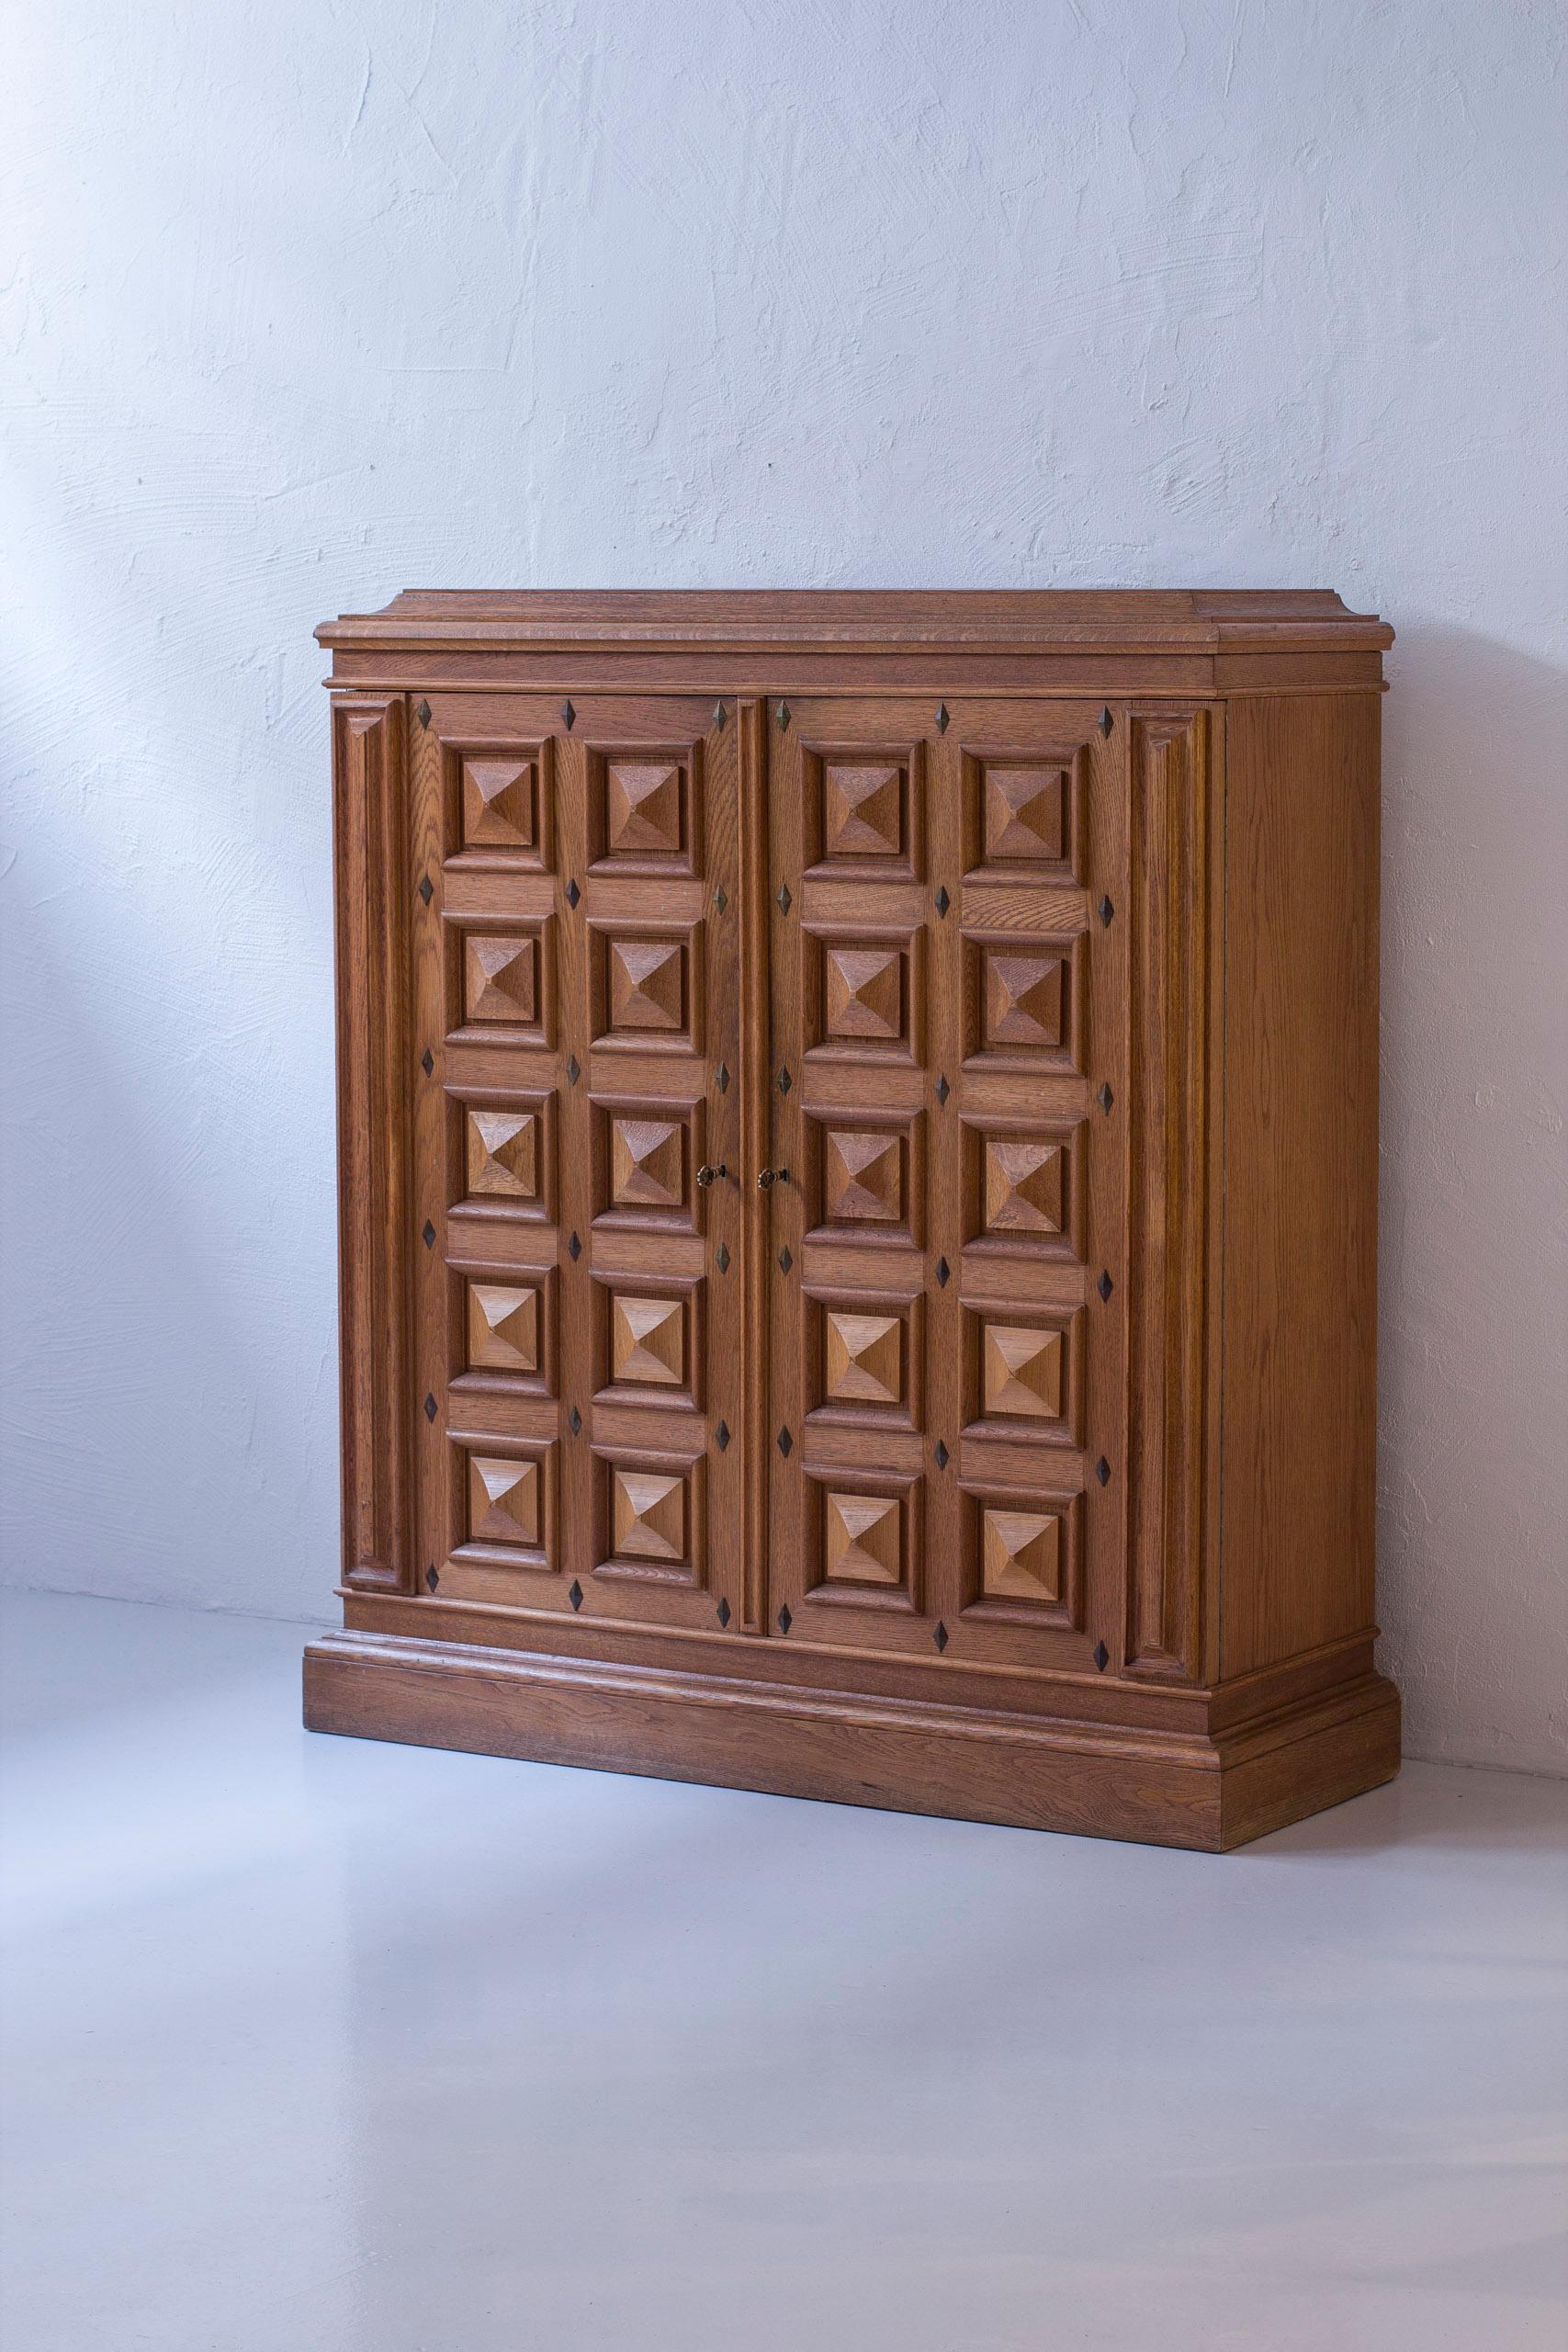 Norwegian Art Deco cabinet made during the 1920-30s. Made from oak with brass details. Heavy geometrical relief patterned doors. Two original keys made from brass. Adjustable drawer shelves on the cabinets right side. Good vintage condition with